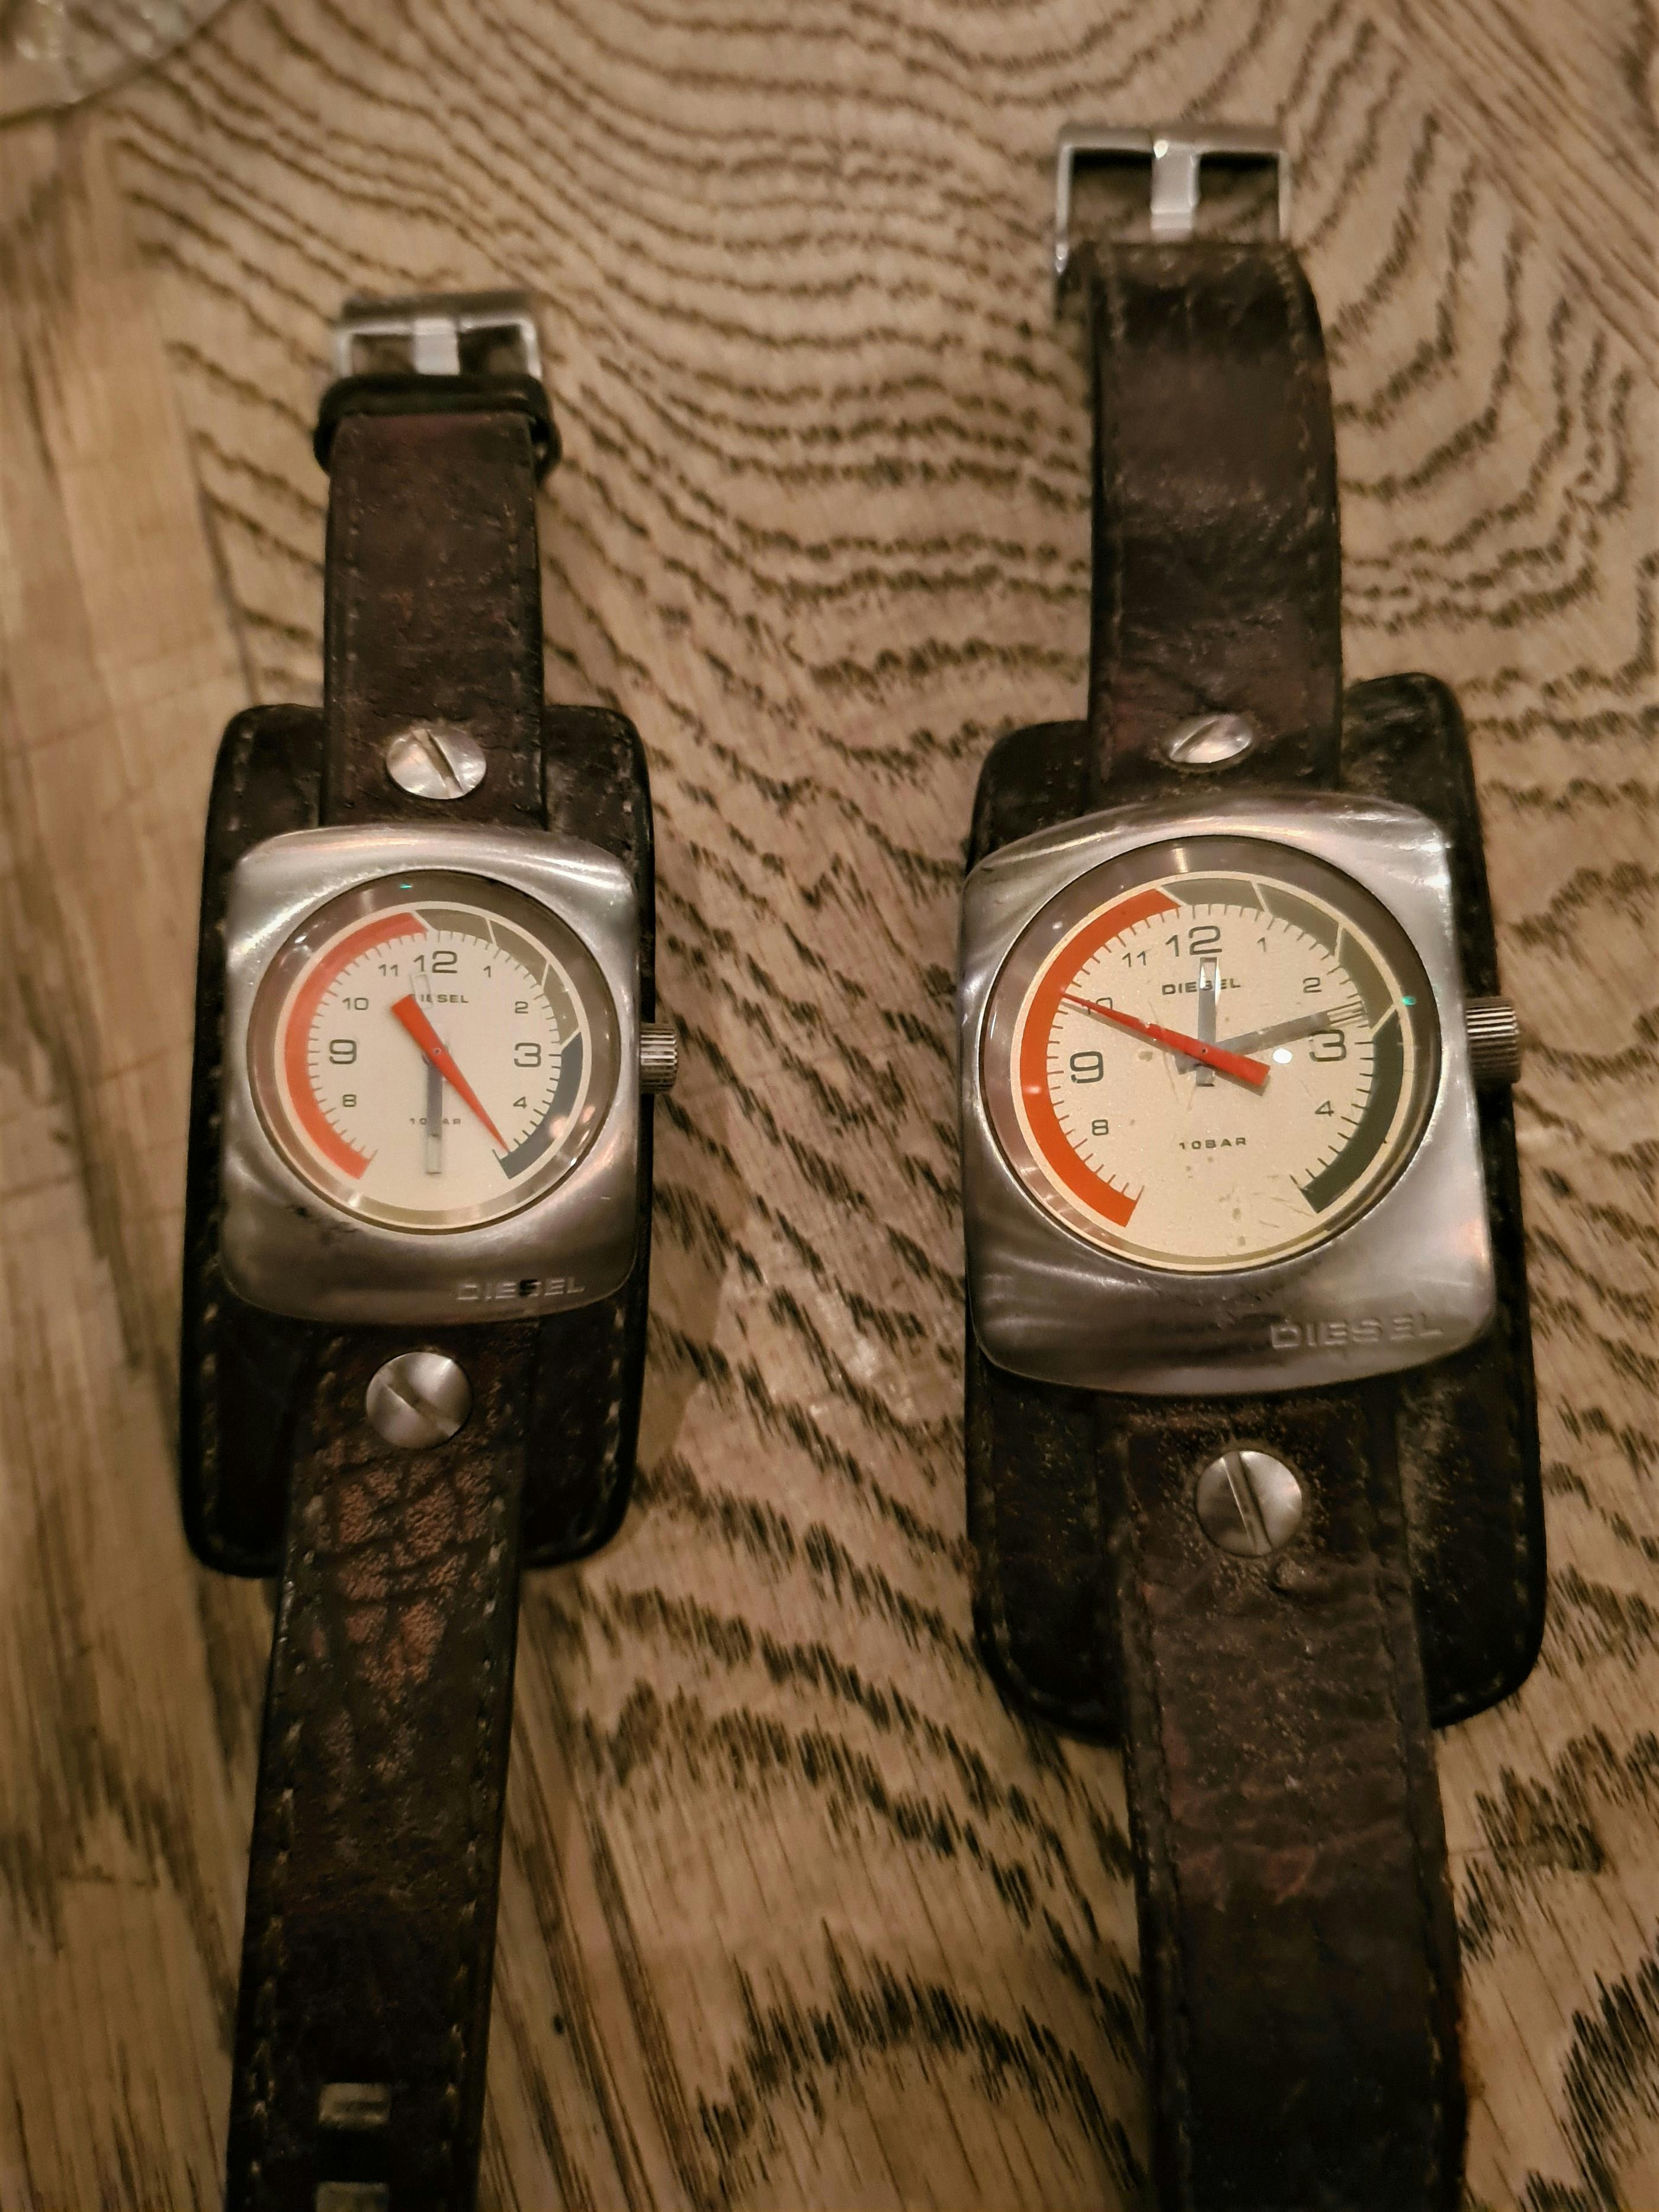 Two Diesel Fashion watches from 2005 brought along to our Meetup